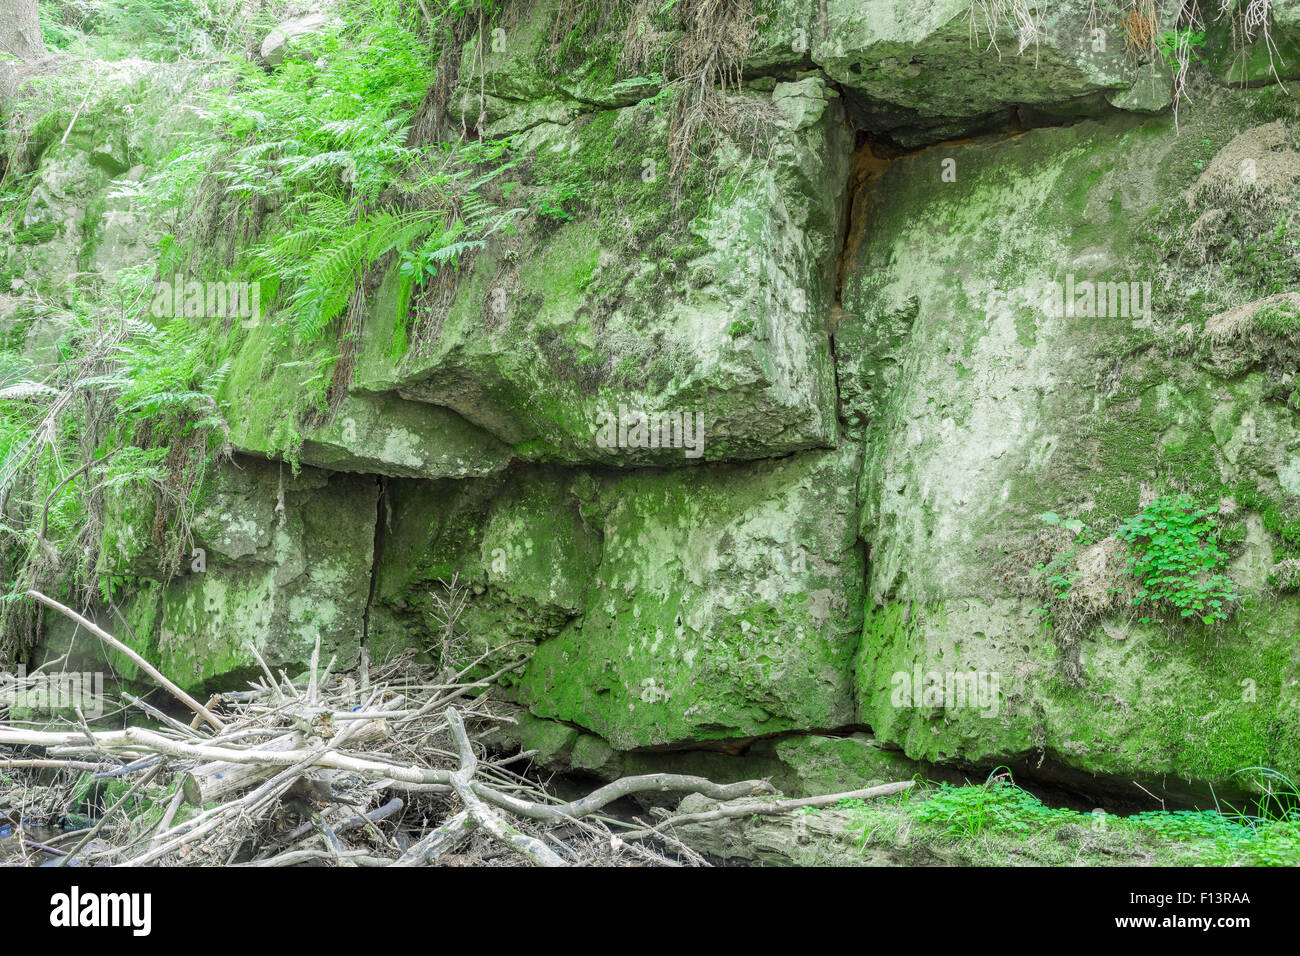 Rocks covered with moss and forest plants Stock Photo